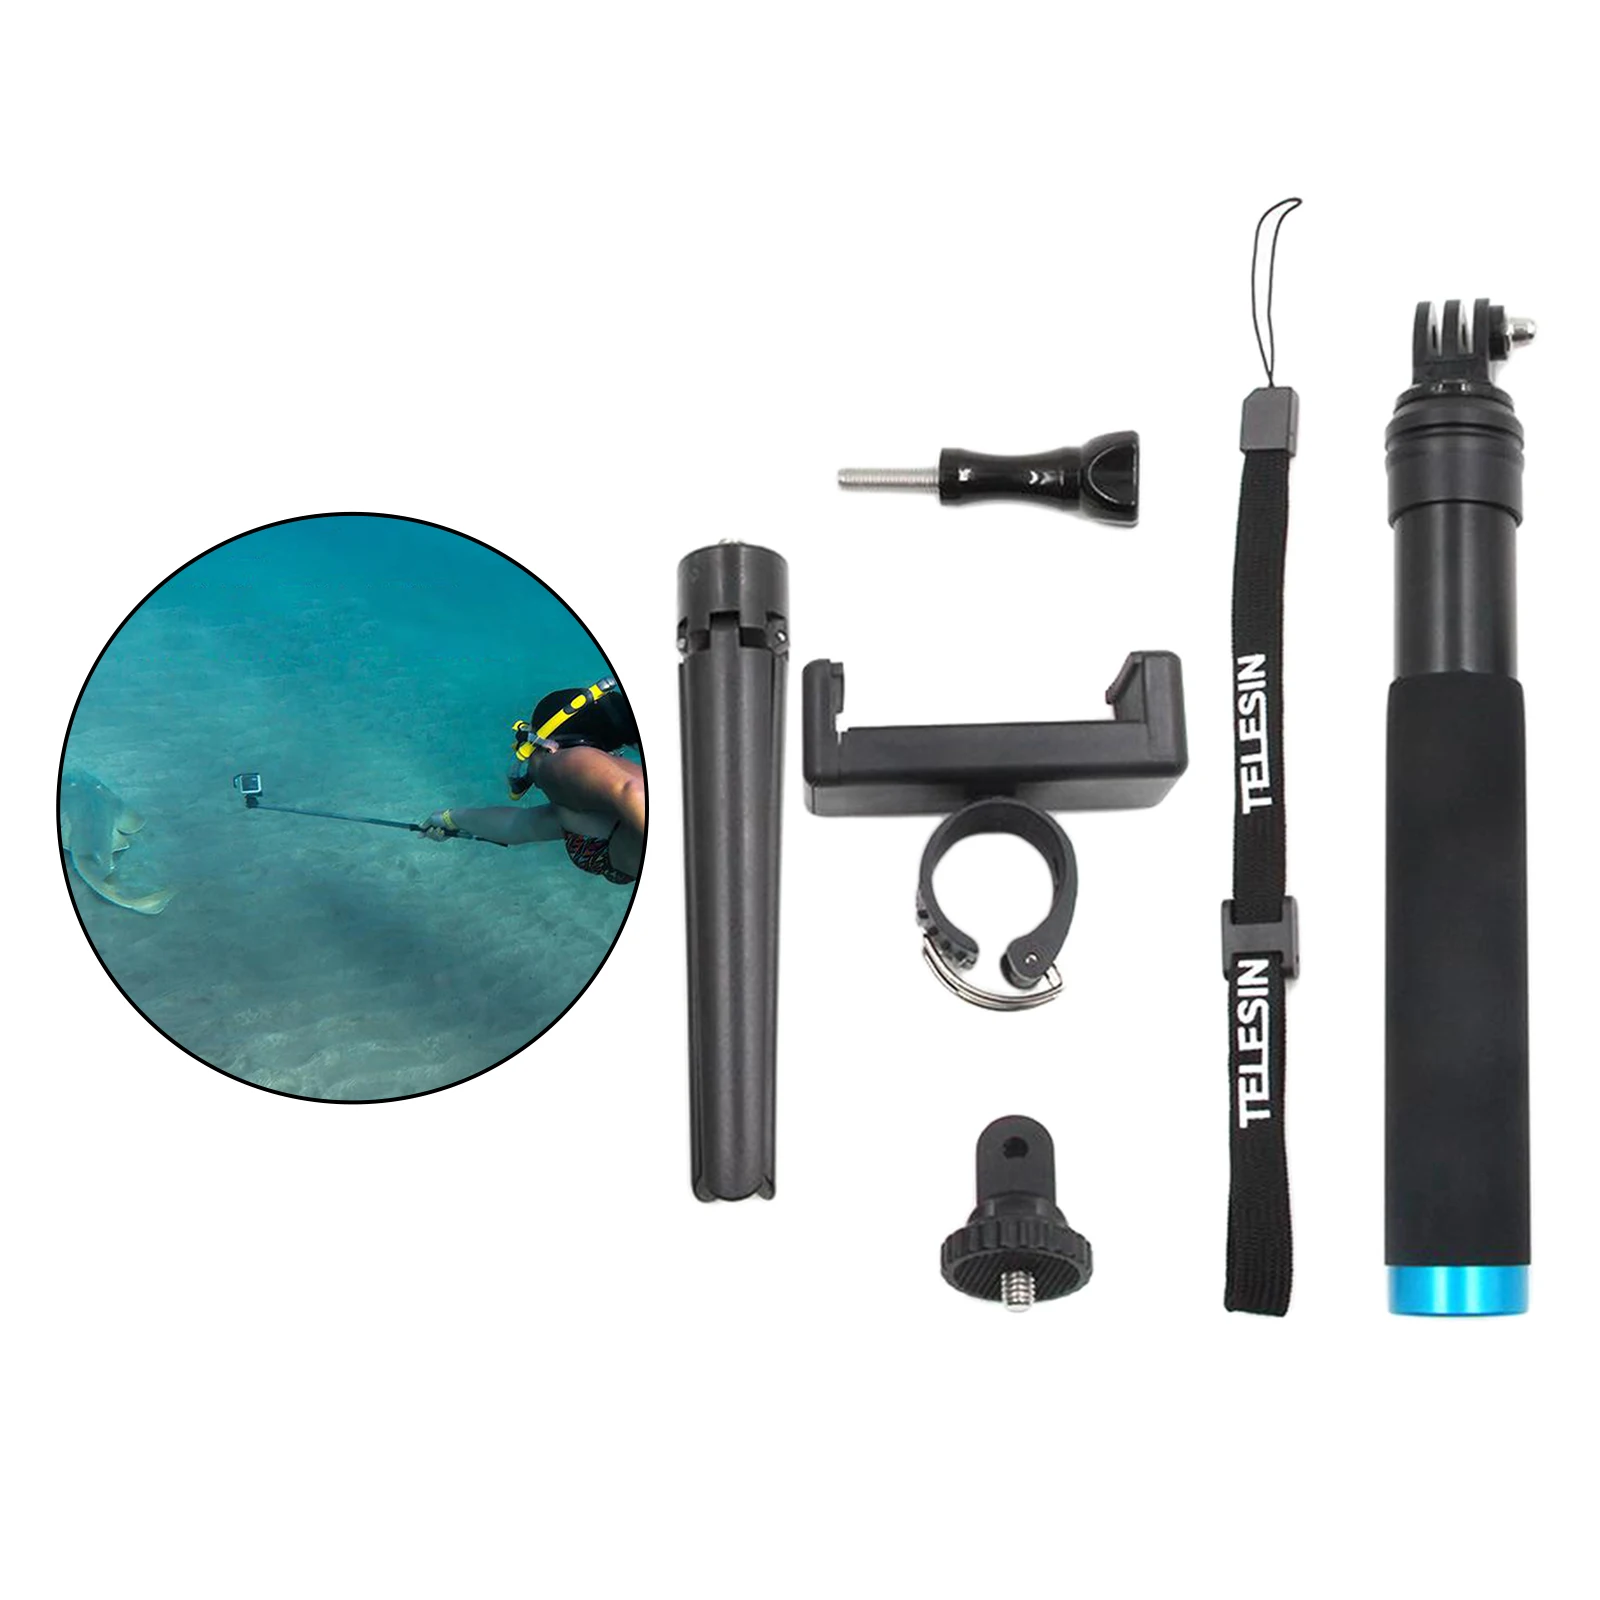 Premium Portable Durable Alloy Aluminum Selfie Stick with Tripod Stand Adjustable Telescopic Rod Compatible for   6/7/8